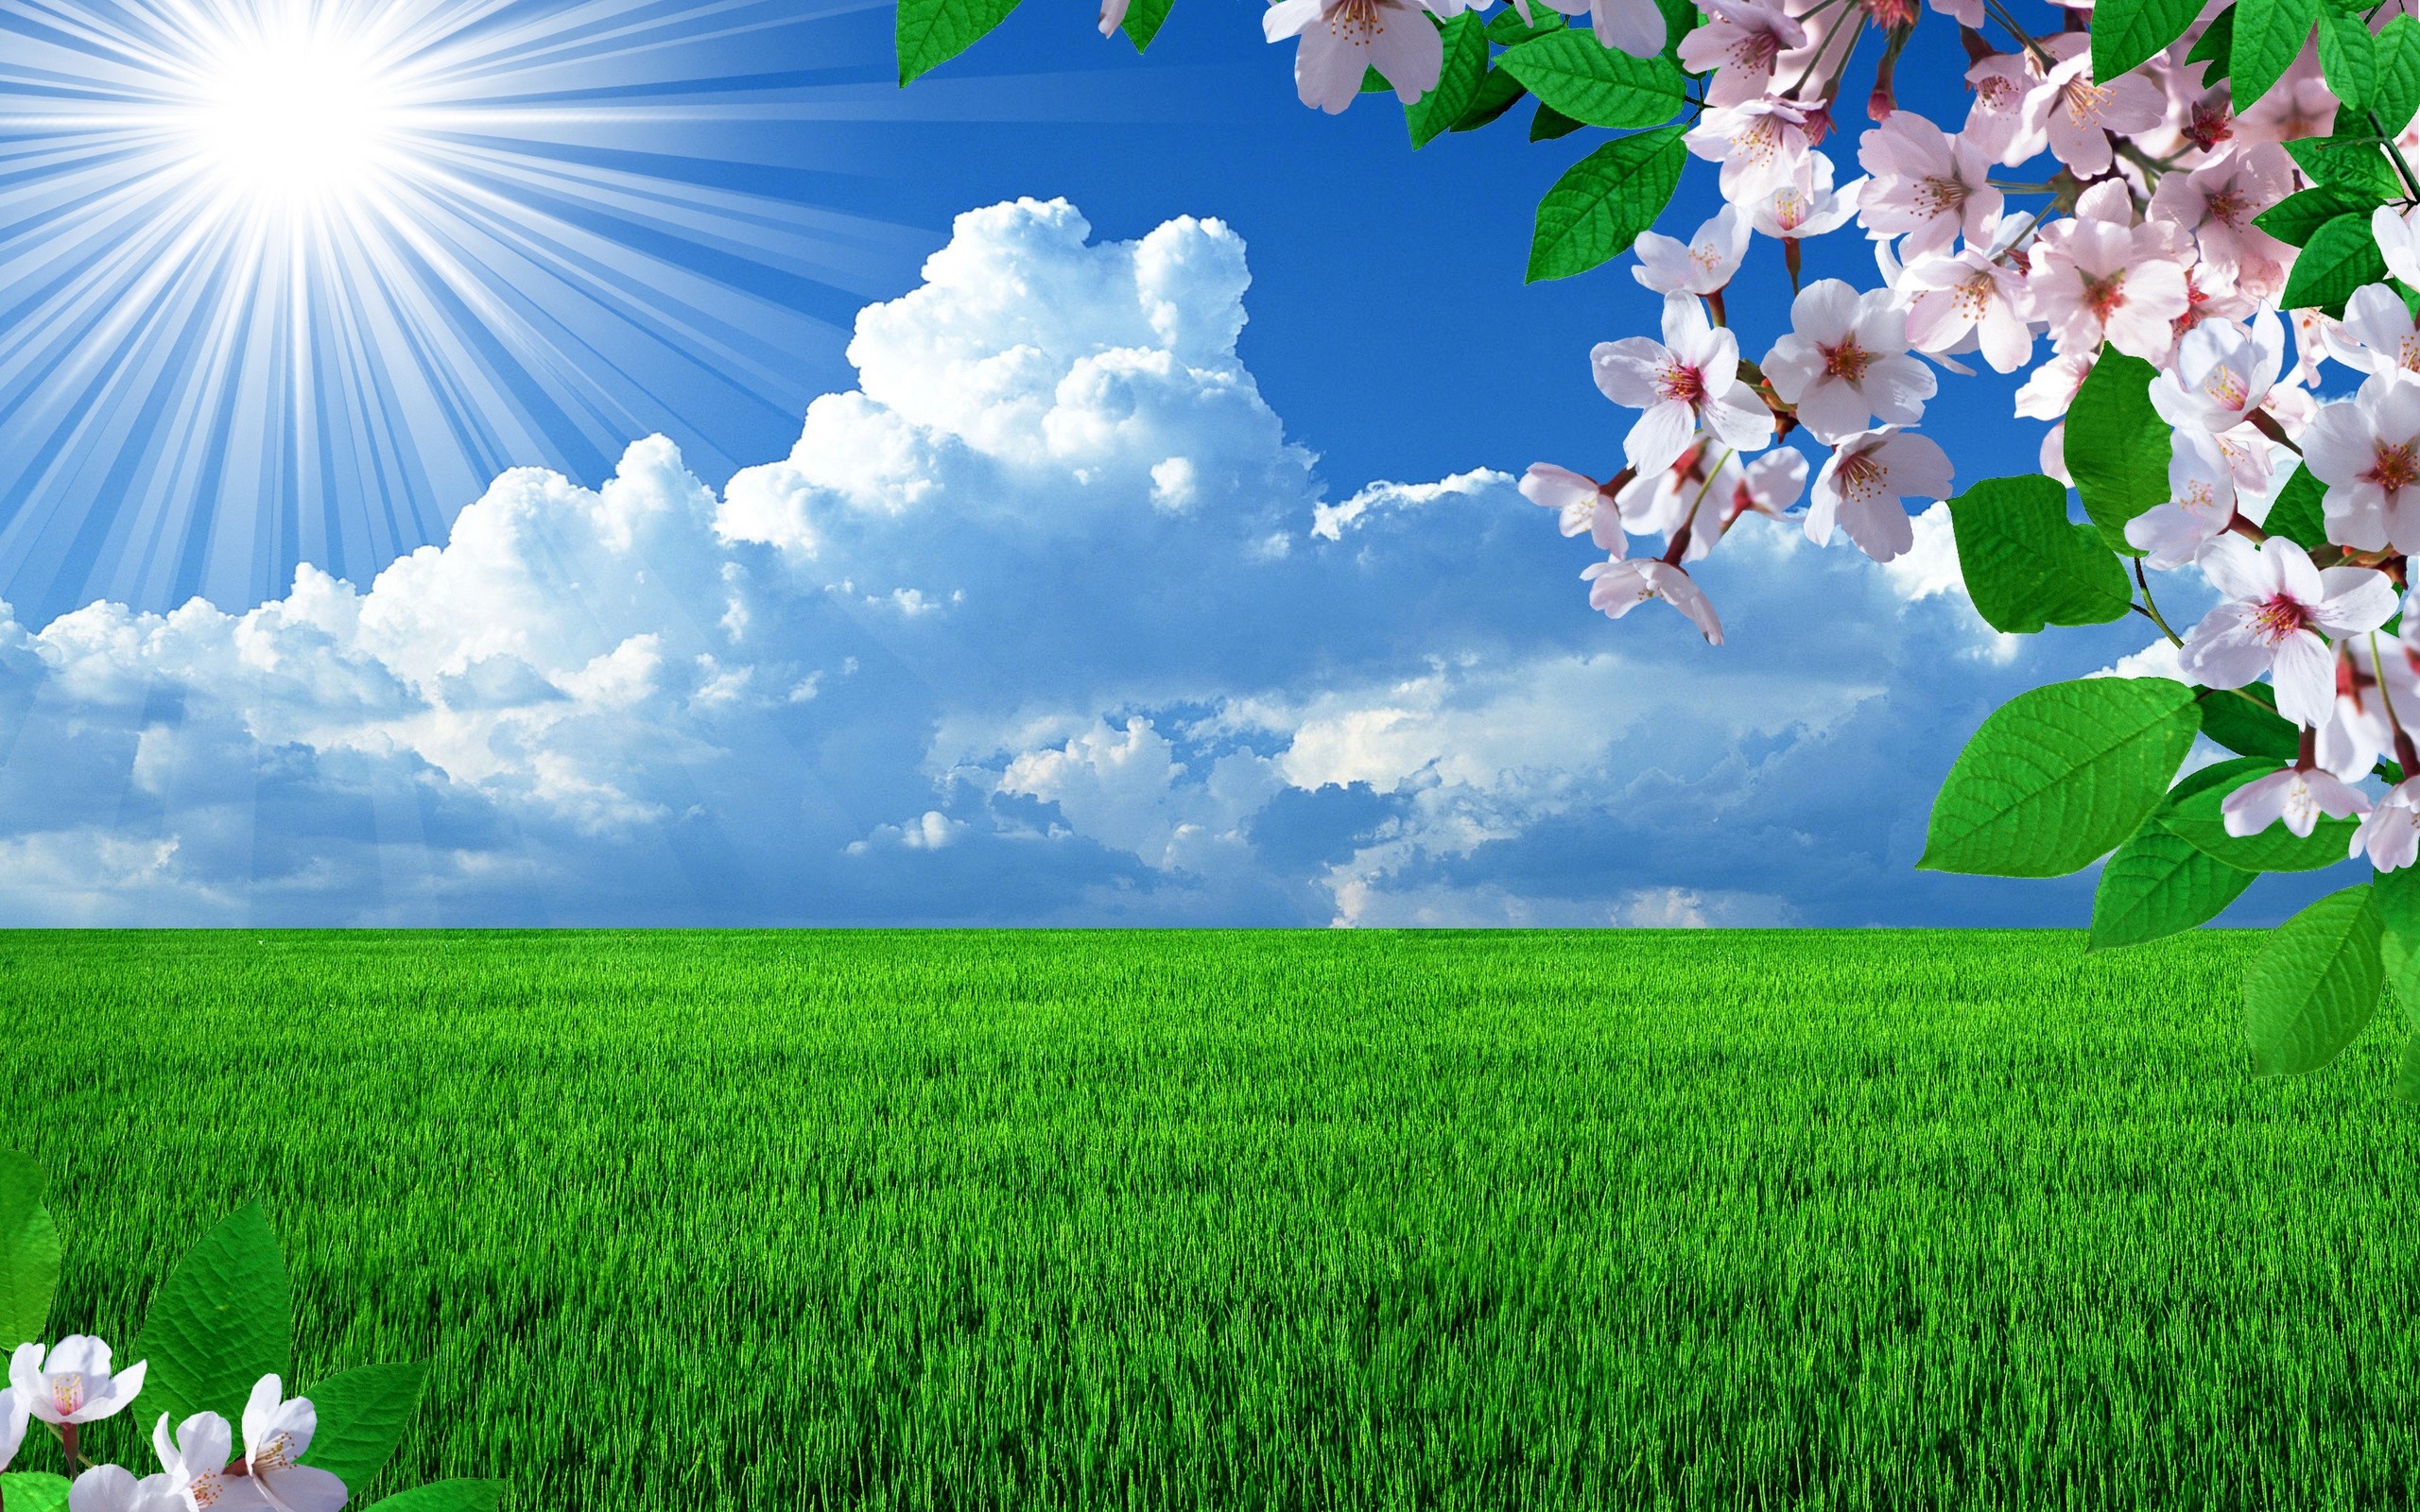 Spring Field Wallpaper And Image Pictures Photos